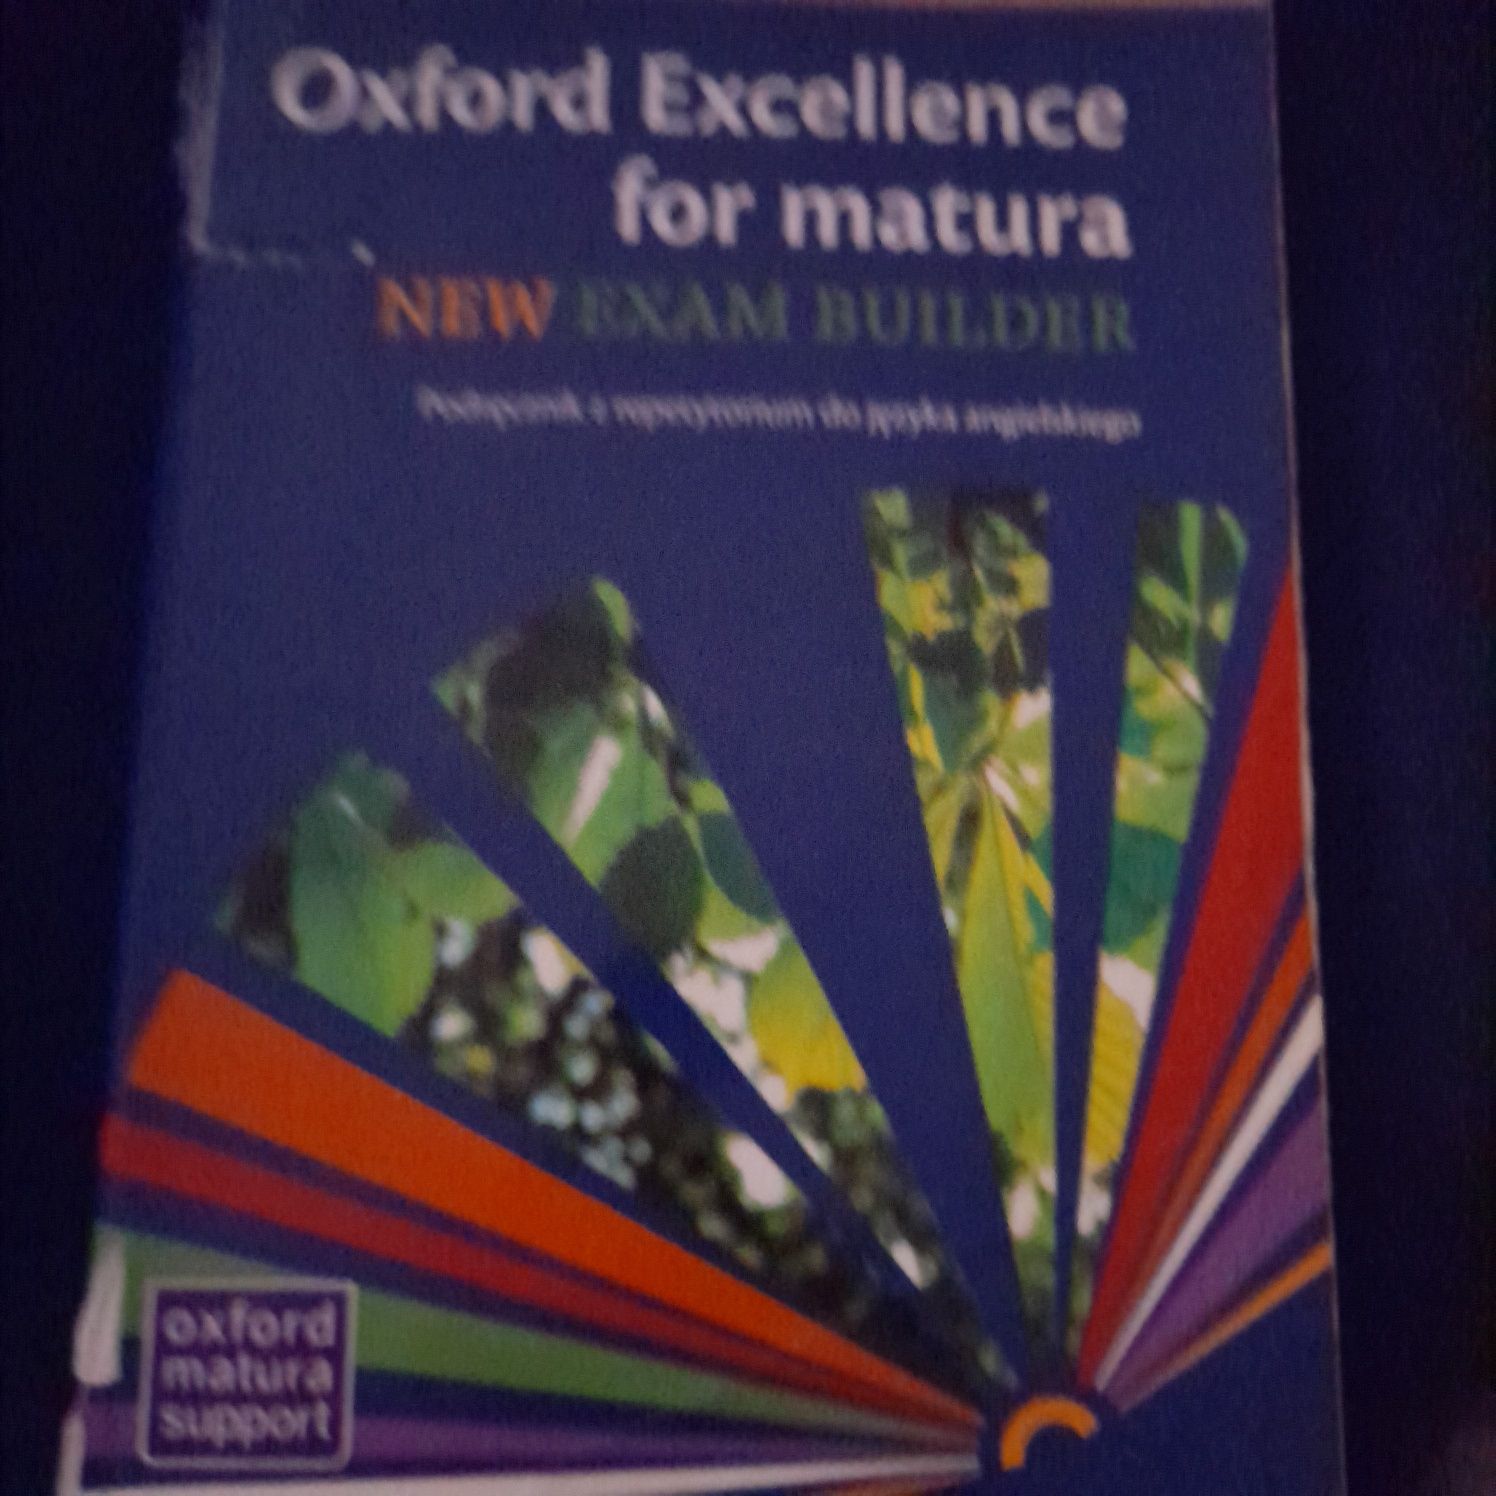 OXFORD  Excellence for matura